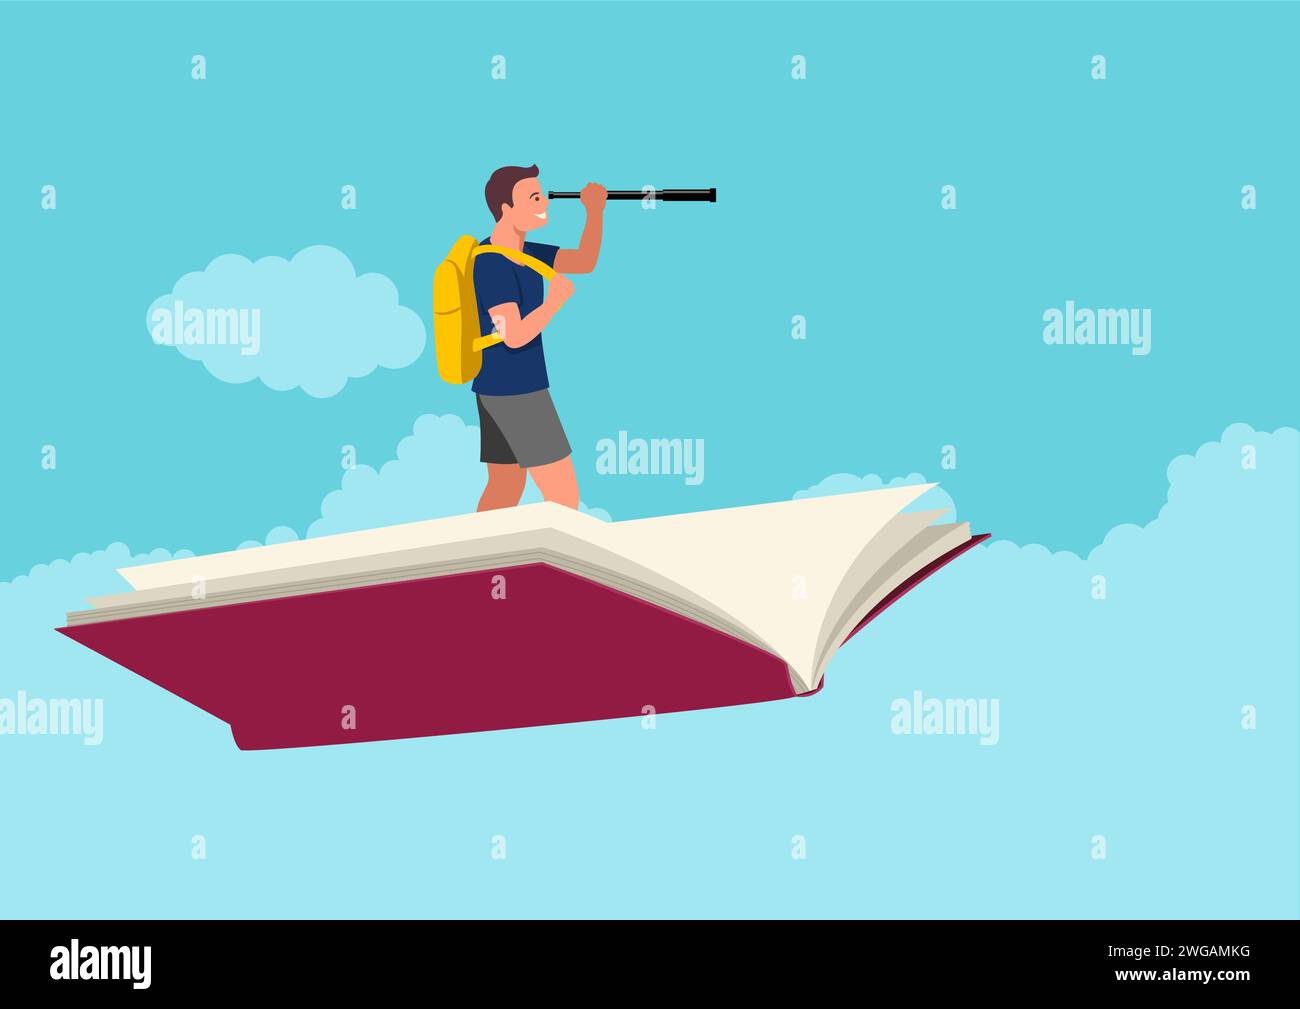 Cartoon illustration of a young boy with backpack using telescope on flying book, education, future plan, forecast Stock Vector